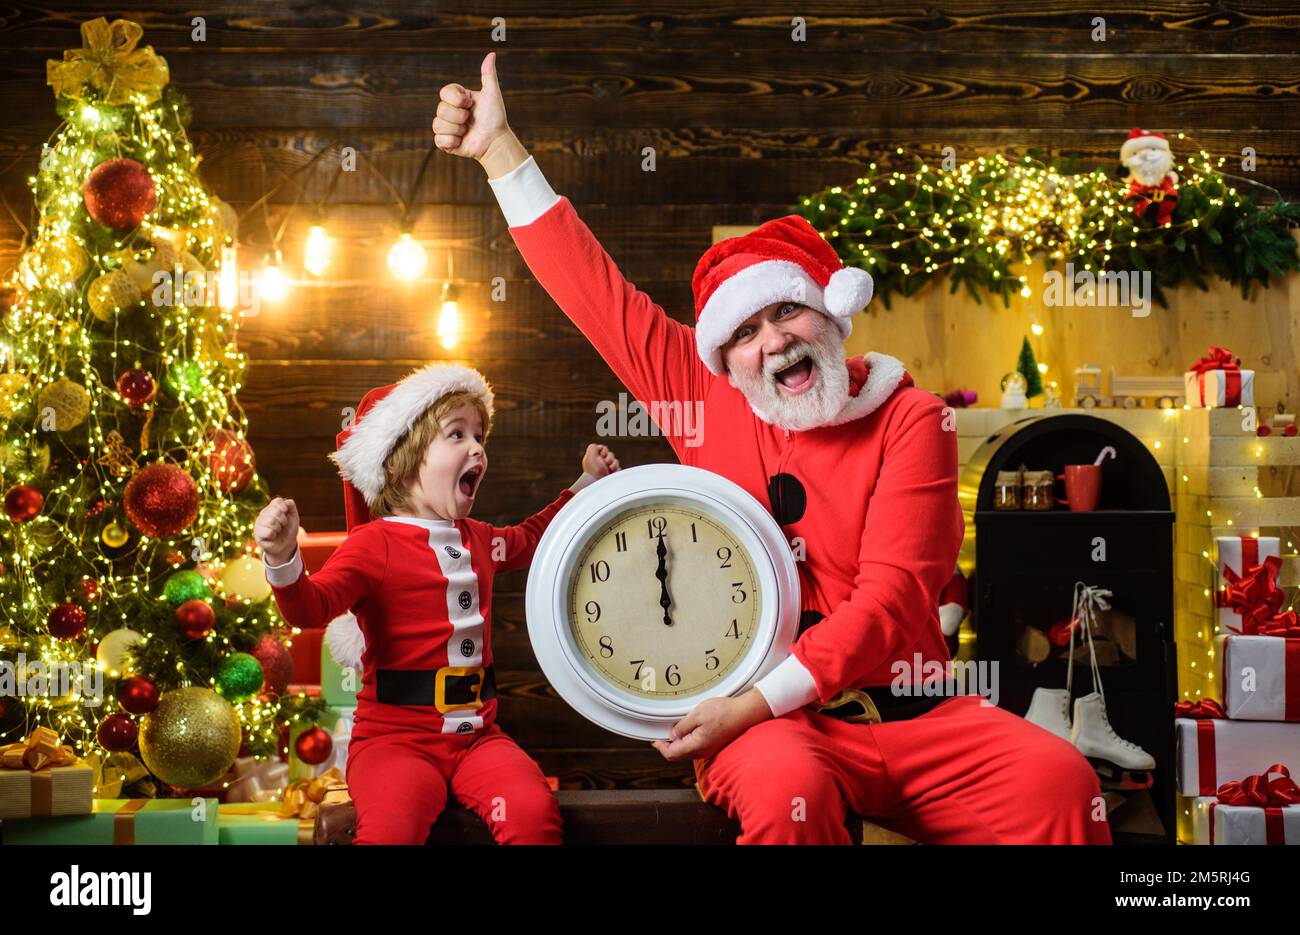 https://c8.alamy.com/comp/2M5RJ4G/santa-claus-and-little-child-boy-with-clock-time-to-celebrate-new-year-midnight-winter-holidays-2M5RJ4G.jpg